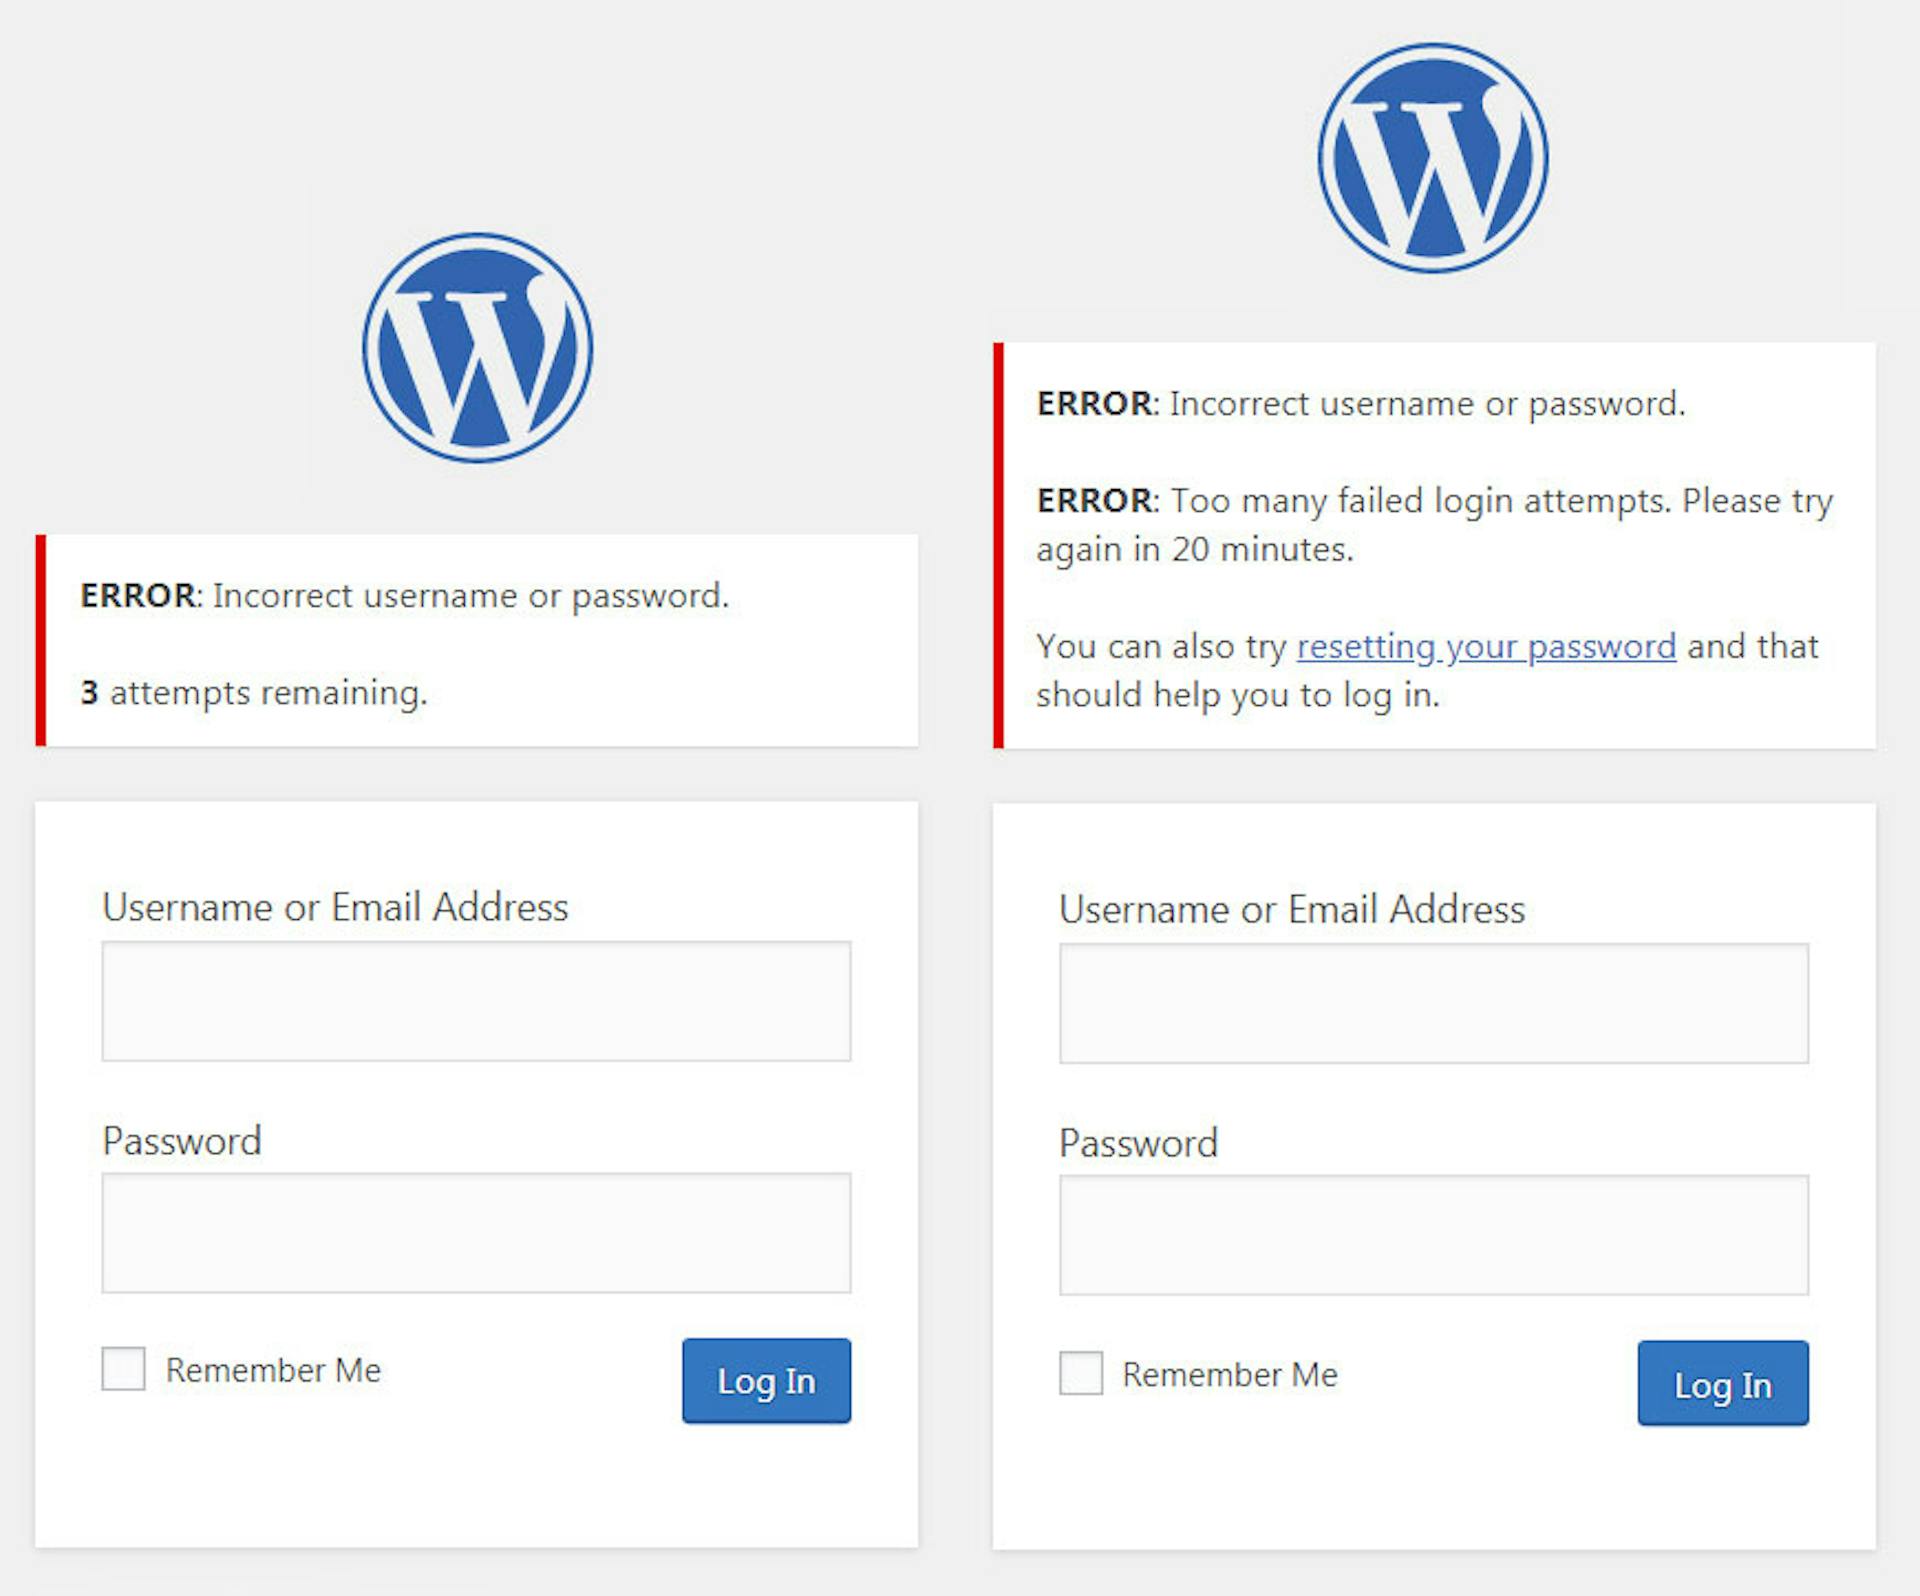 Here's how it looks when a user attempts to log in too many times and triggers the login security mechanism on WordPress.org. Image sources: WordPress.org. (I created a compilation image using two of their screenshots.) 